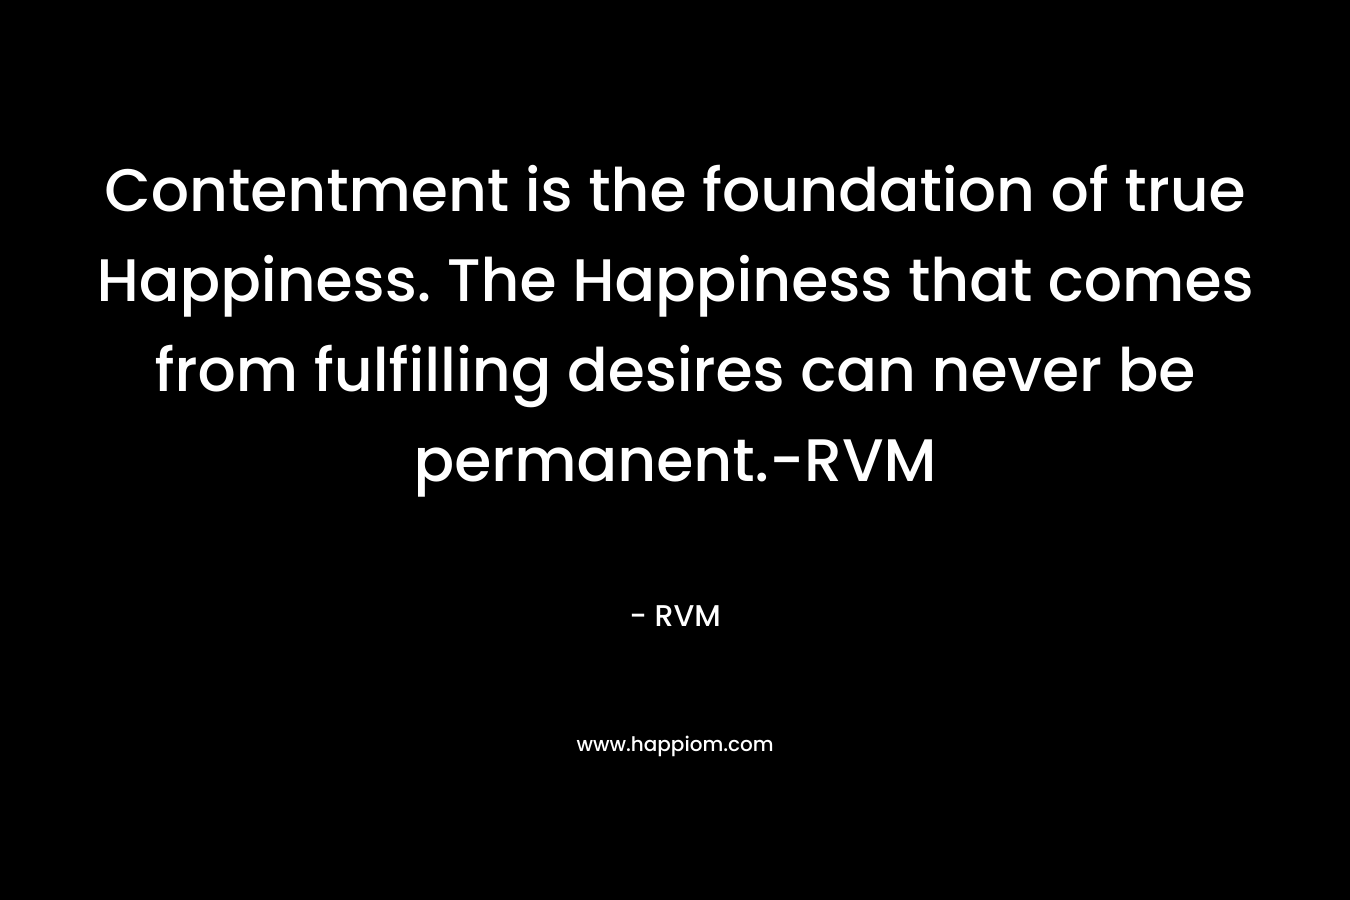 Contentment is the foundation of true Happiness. The Happiness that comes from fulfilling desires can never be permanent.-RVM